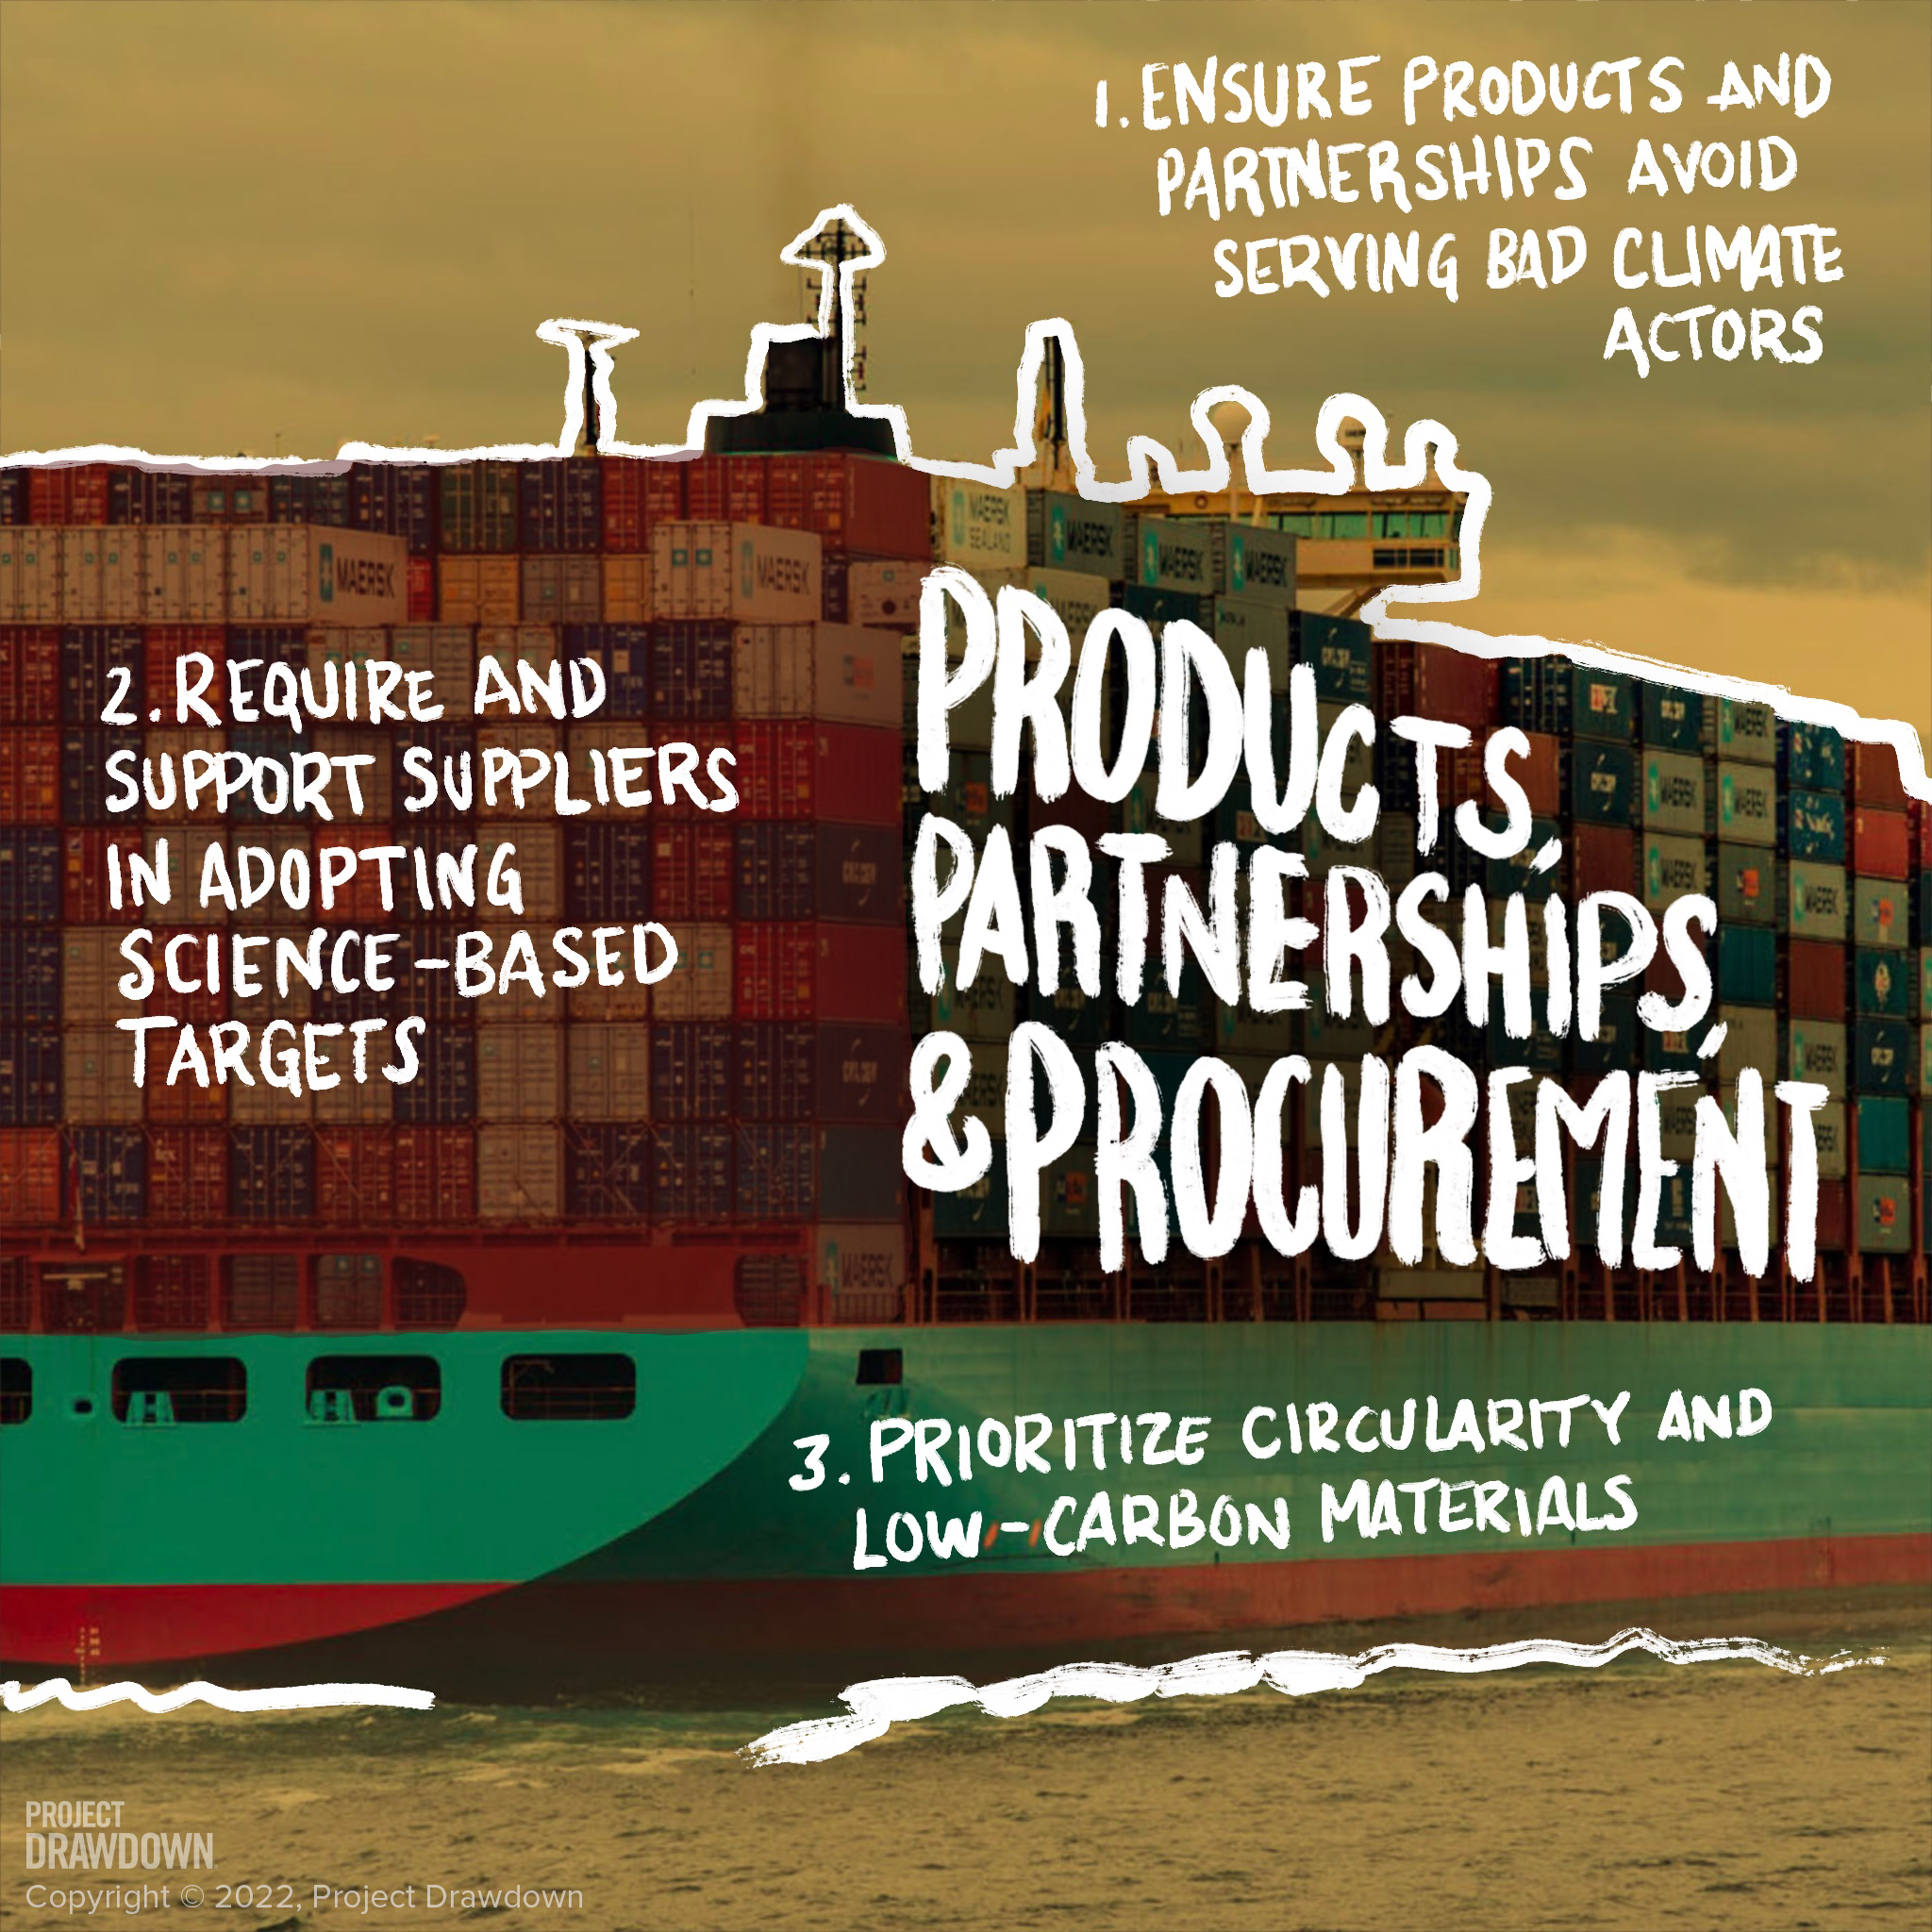 Titled: Products, Partnerships, and Procurement, background image of a container ship.